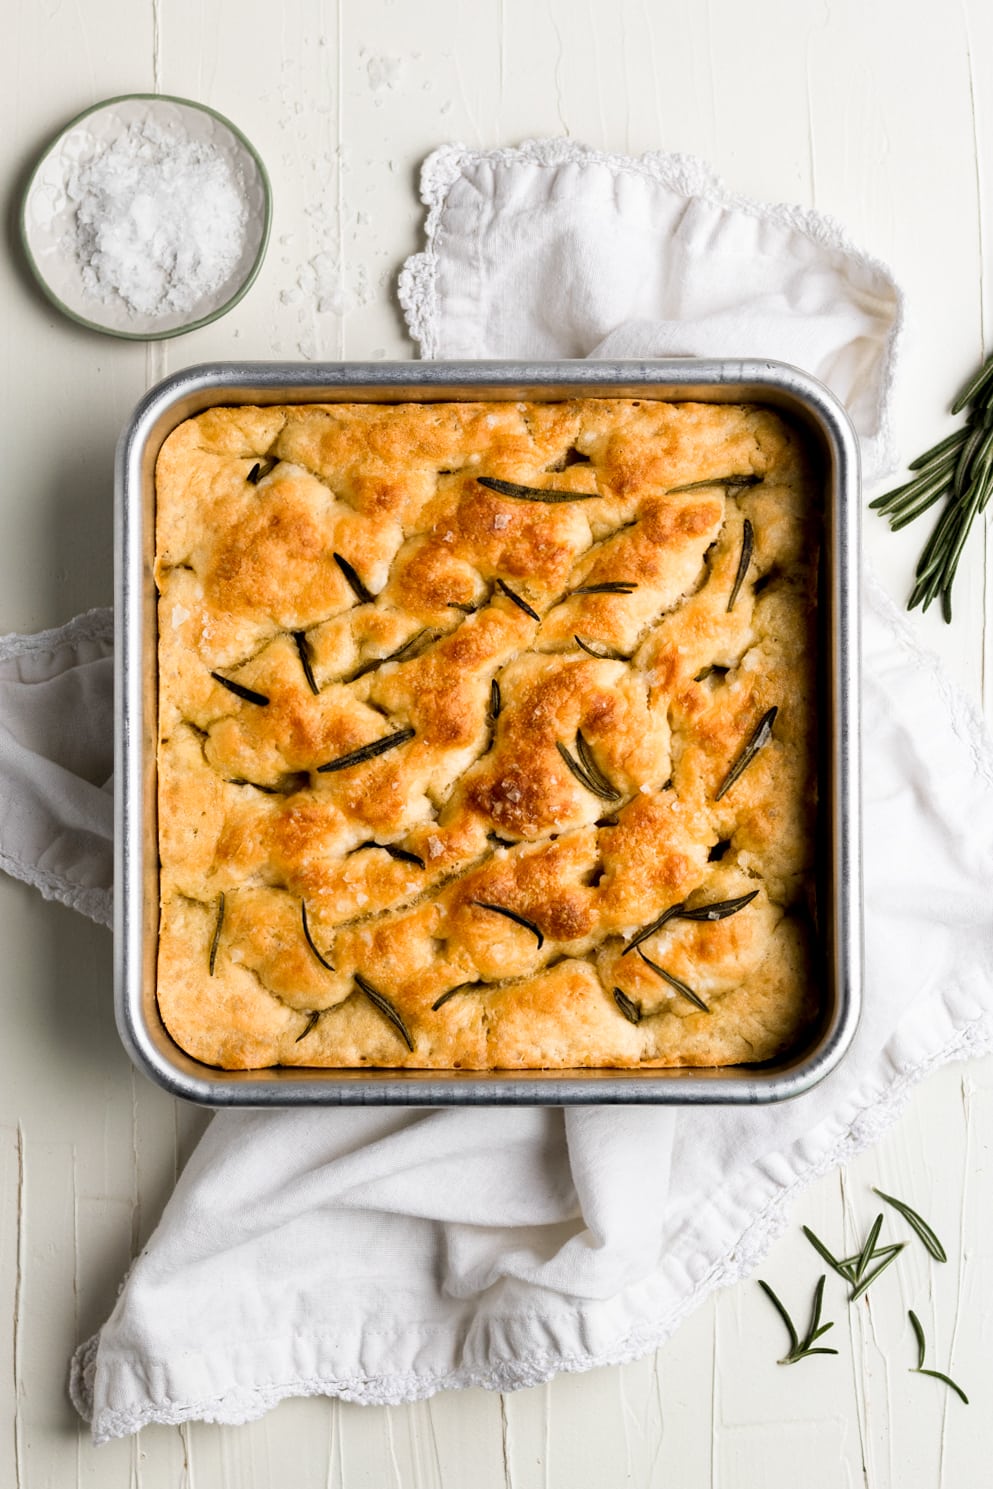 baked focaccia bread with rosemary sea salt in baking dish 